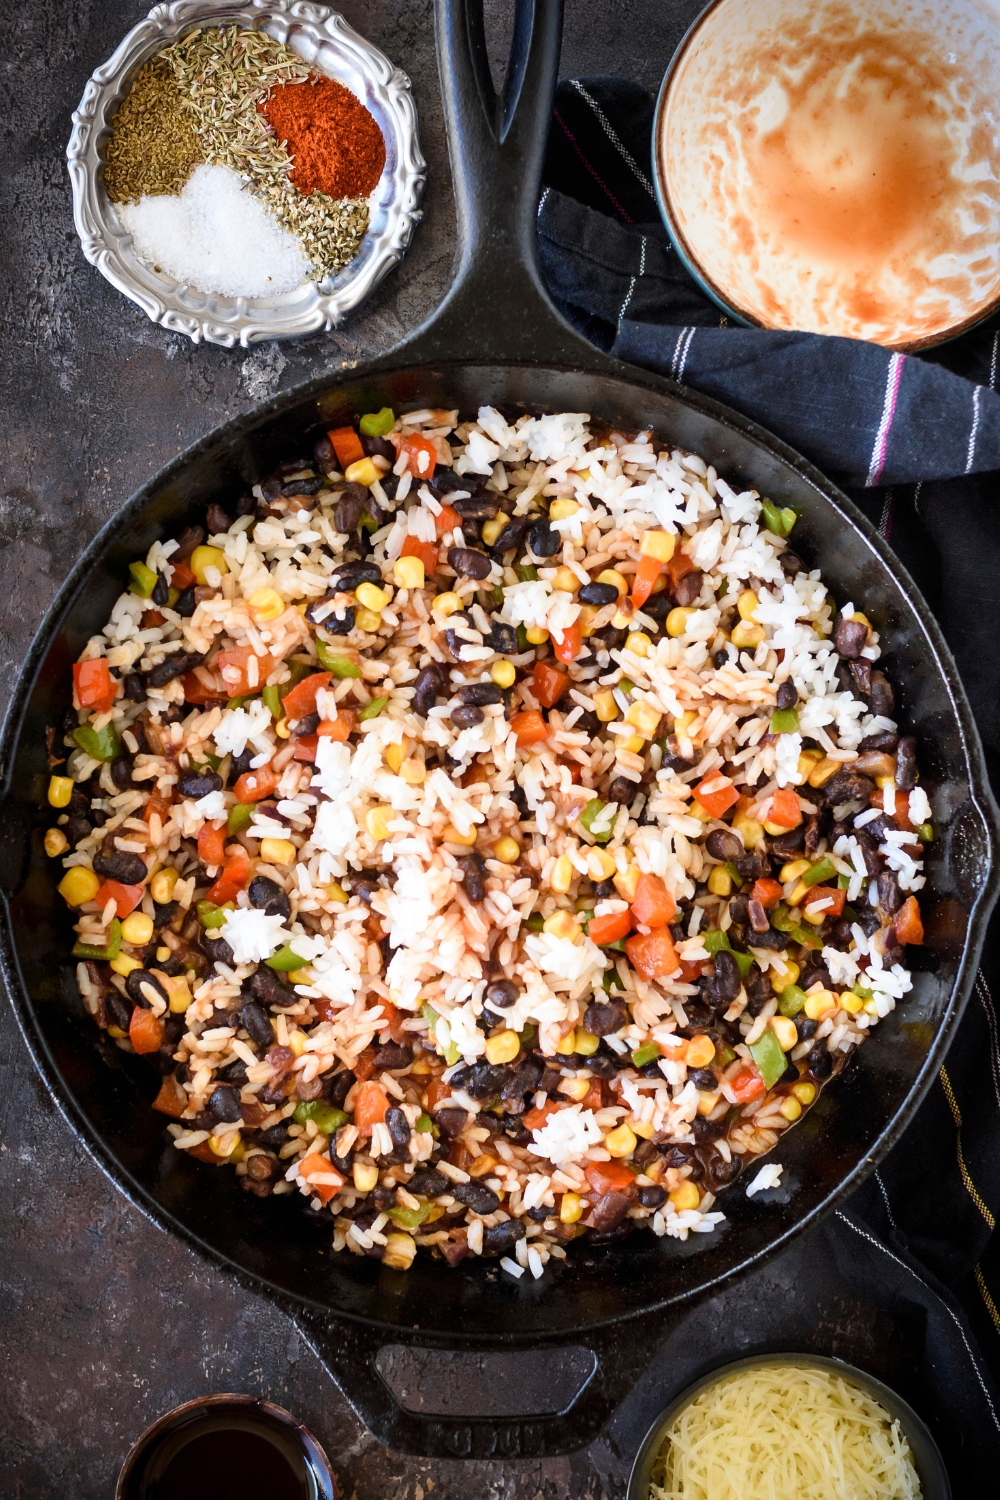 A skillet filled with white rice, black beans, corn, red peppers, and green peppers.